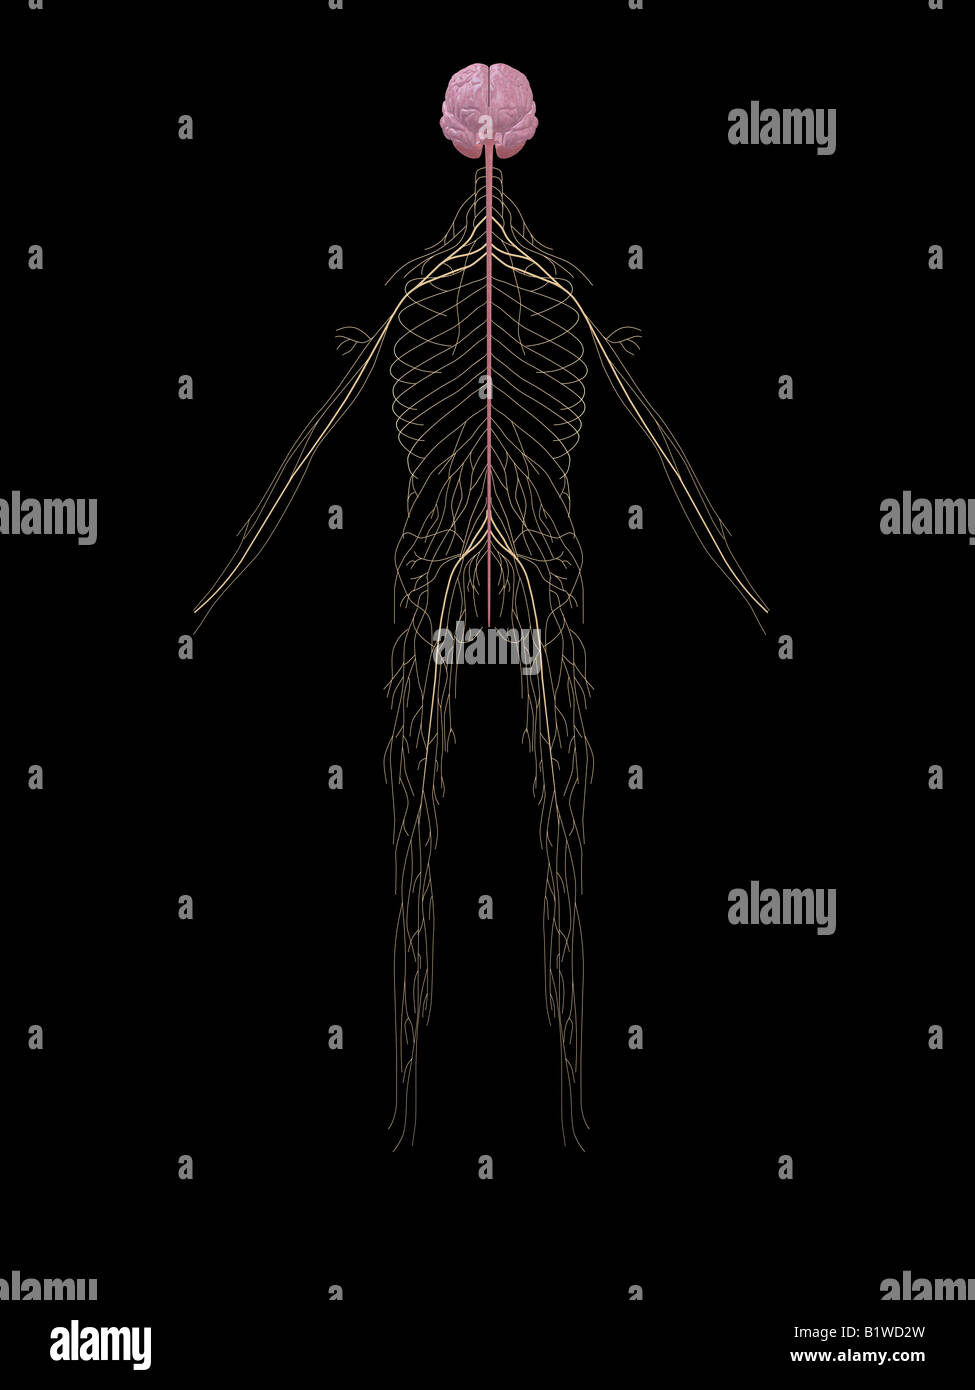 Nervous System Diagram High Resolution Stock Photography and Images - Alamy